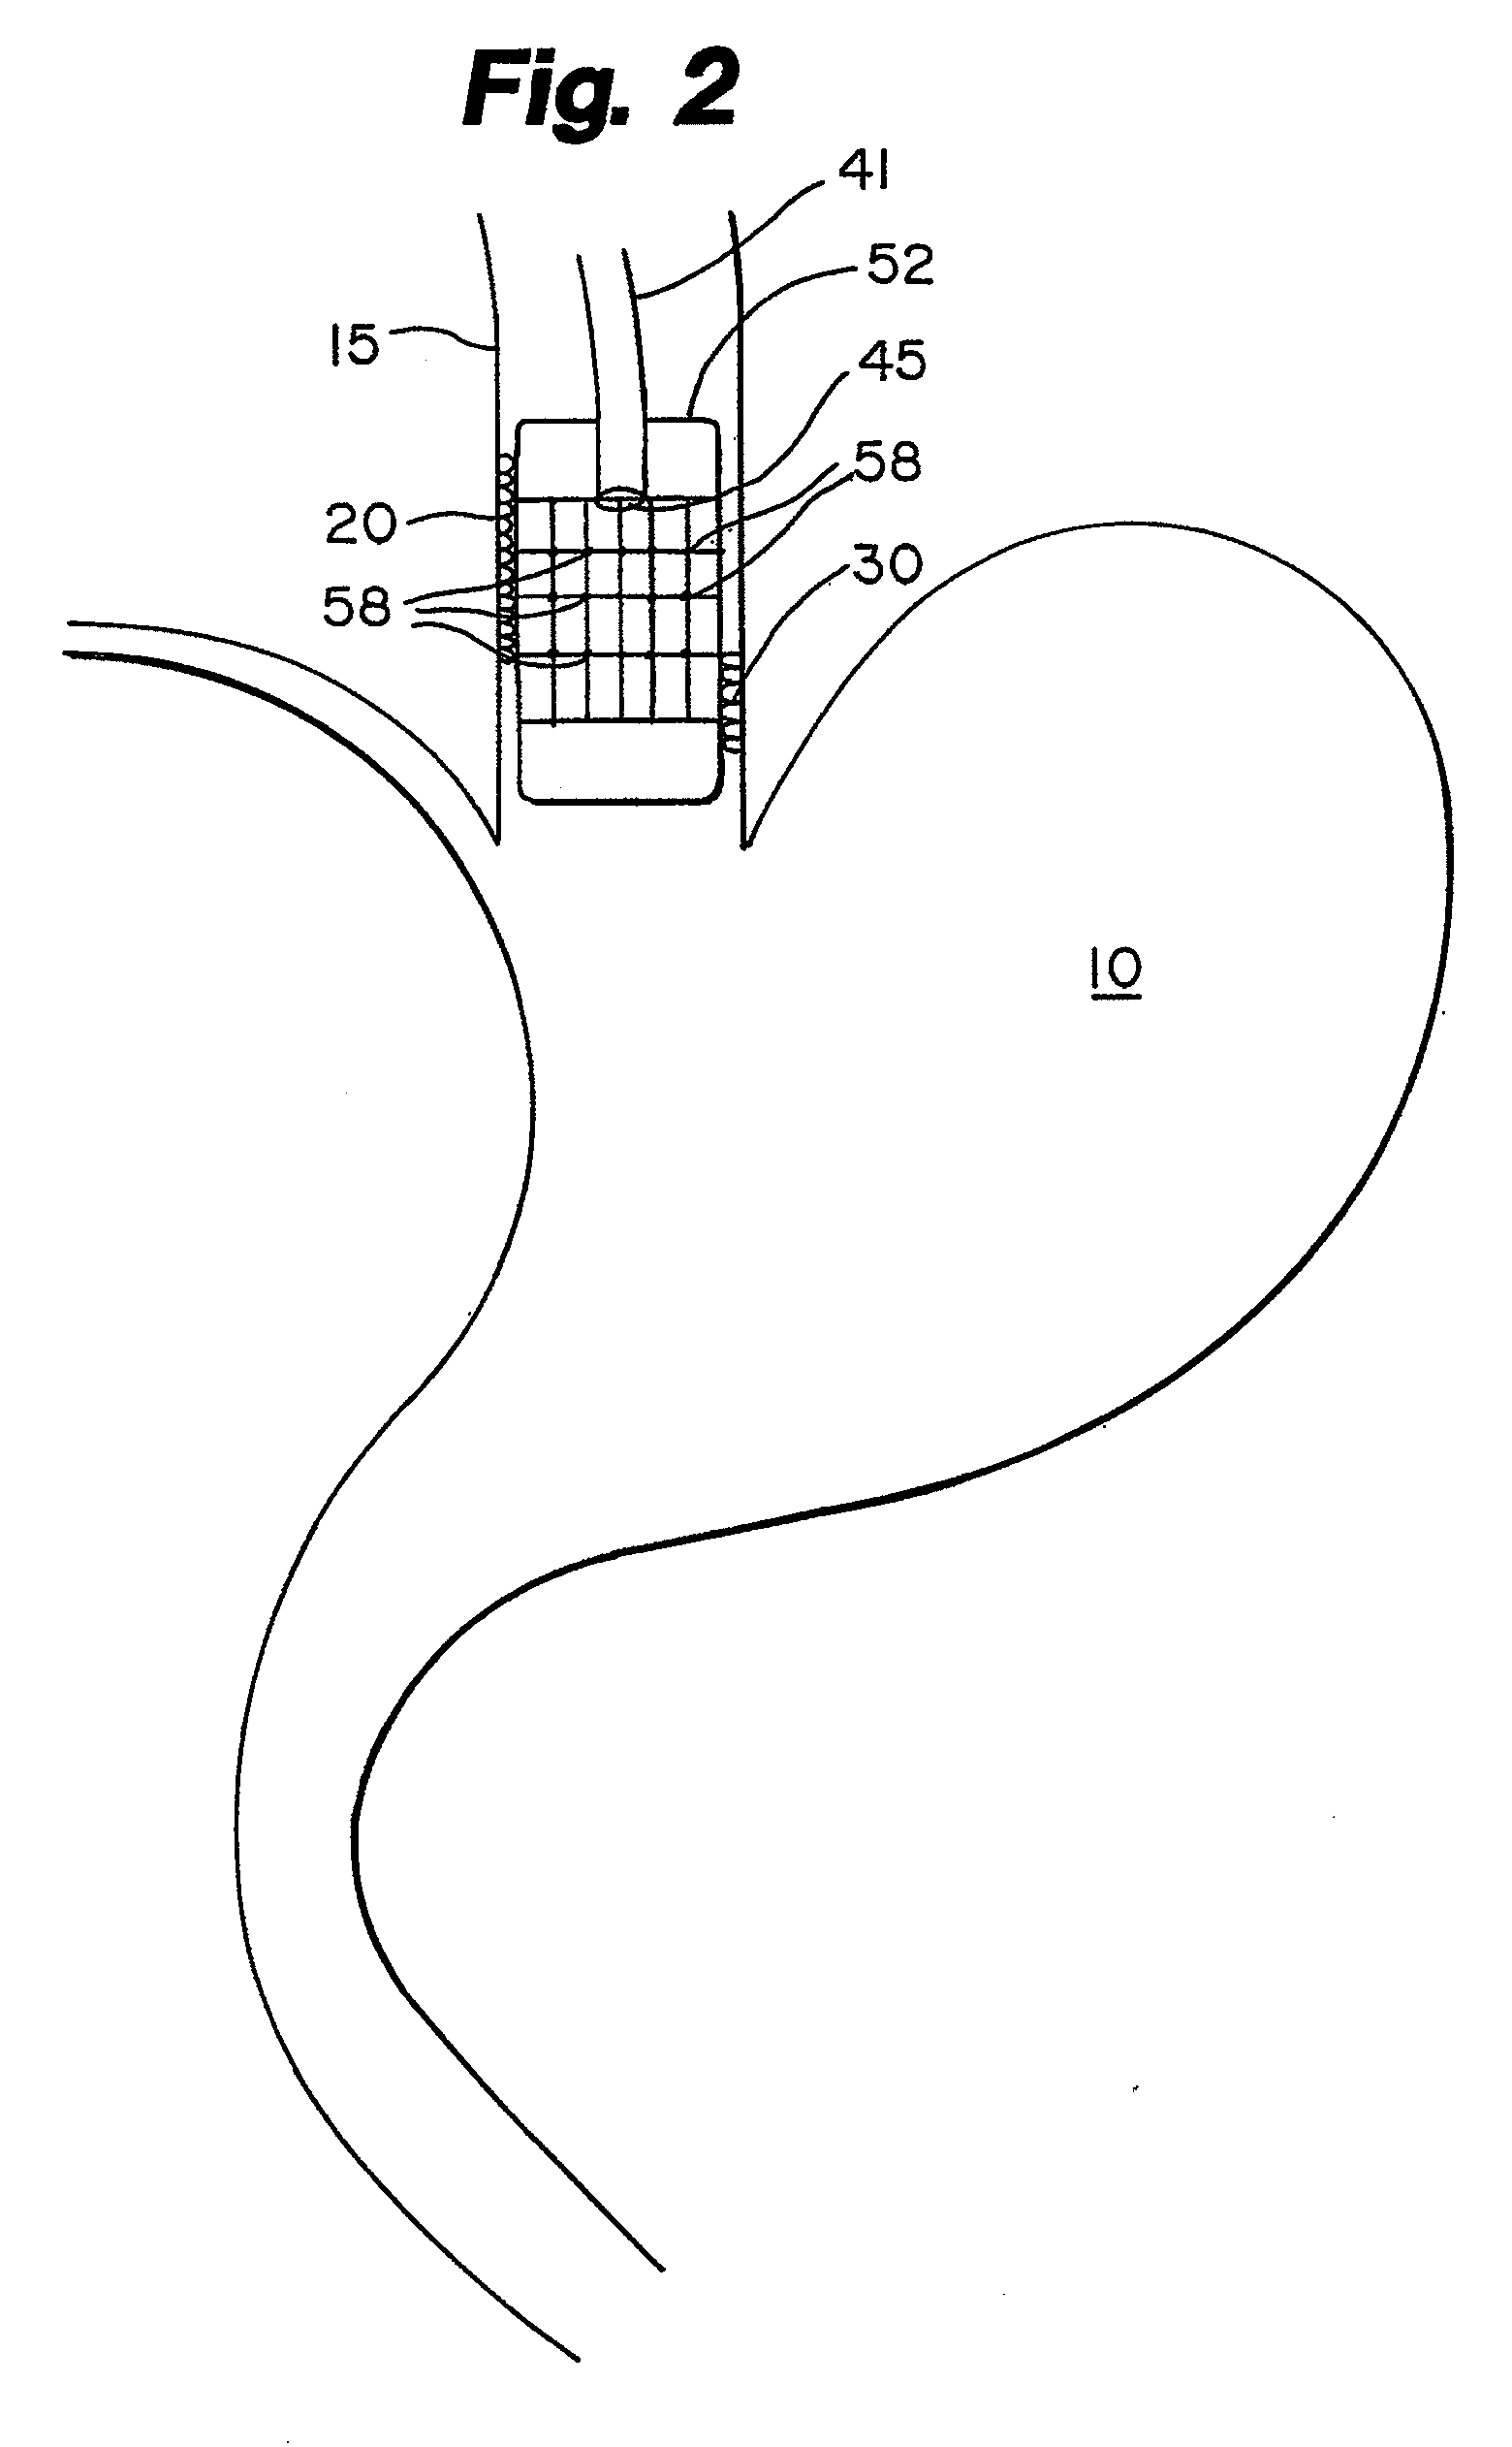 System and method of treating abnormal tissue in the human esophagus